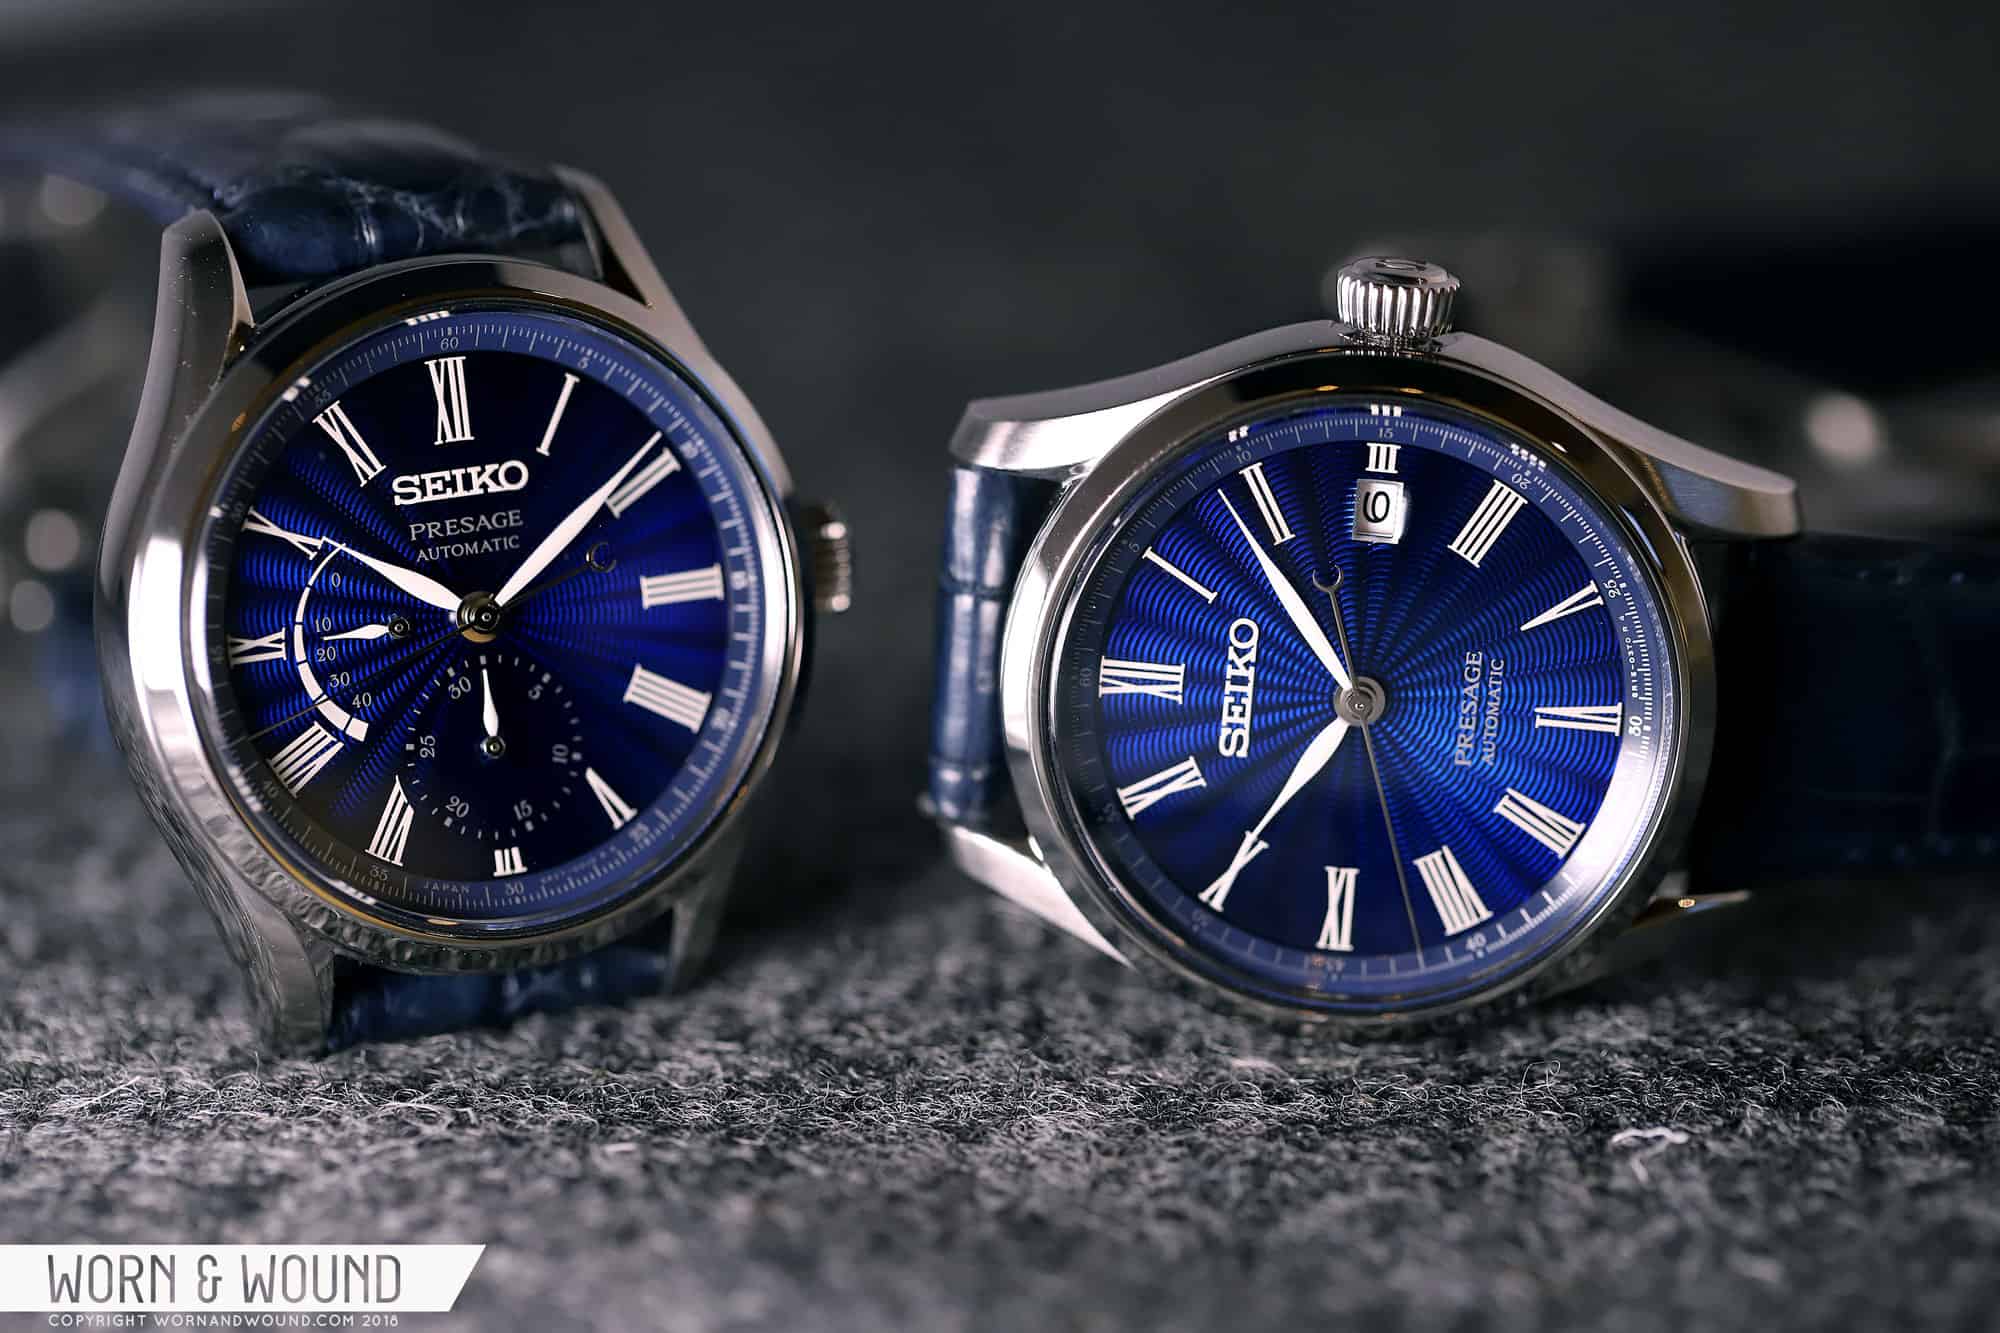 Baselworld 2018: Introducing the Seiko Presage refs. SPB073 and SPB075 Featuring Blue Shippo Enamel Dials